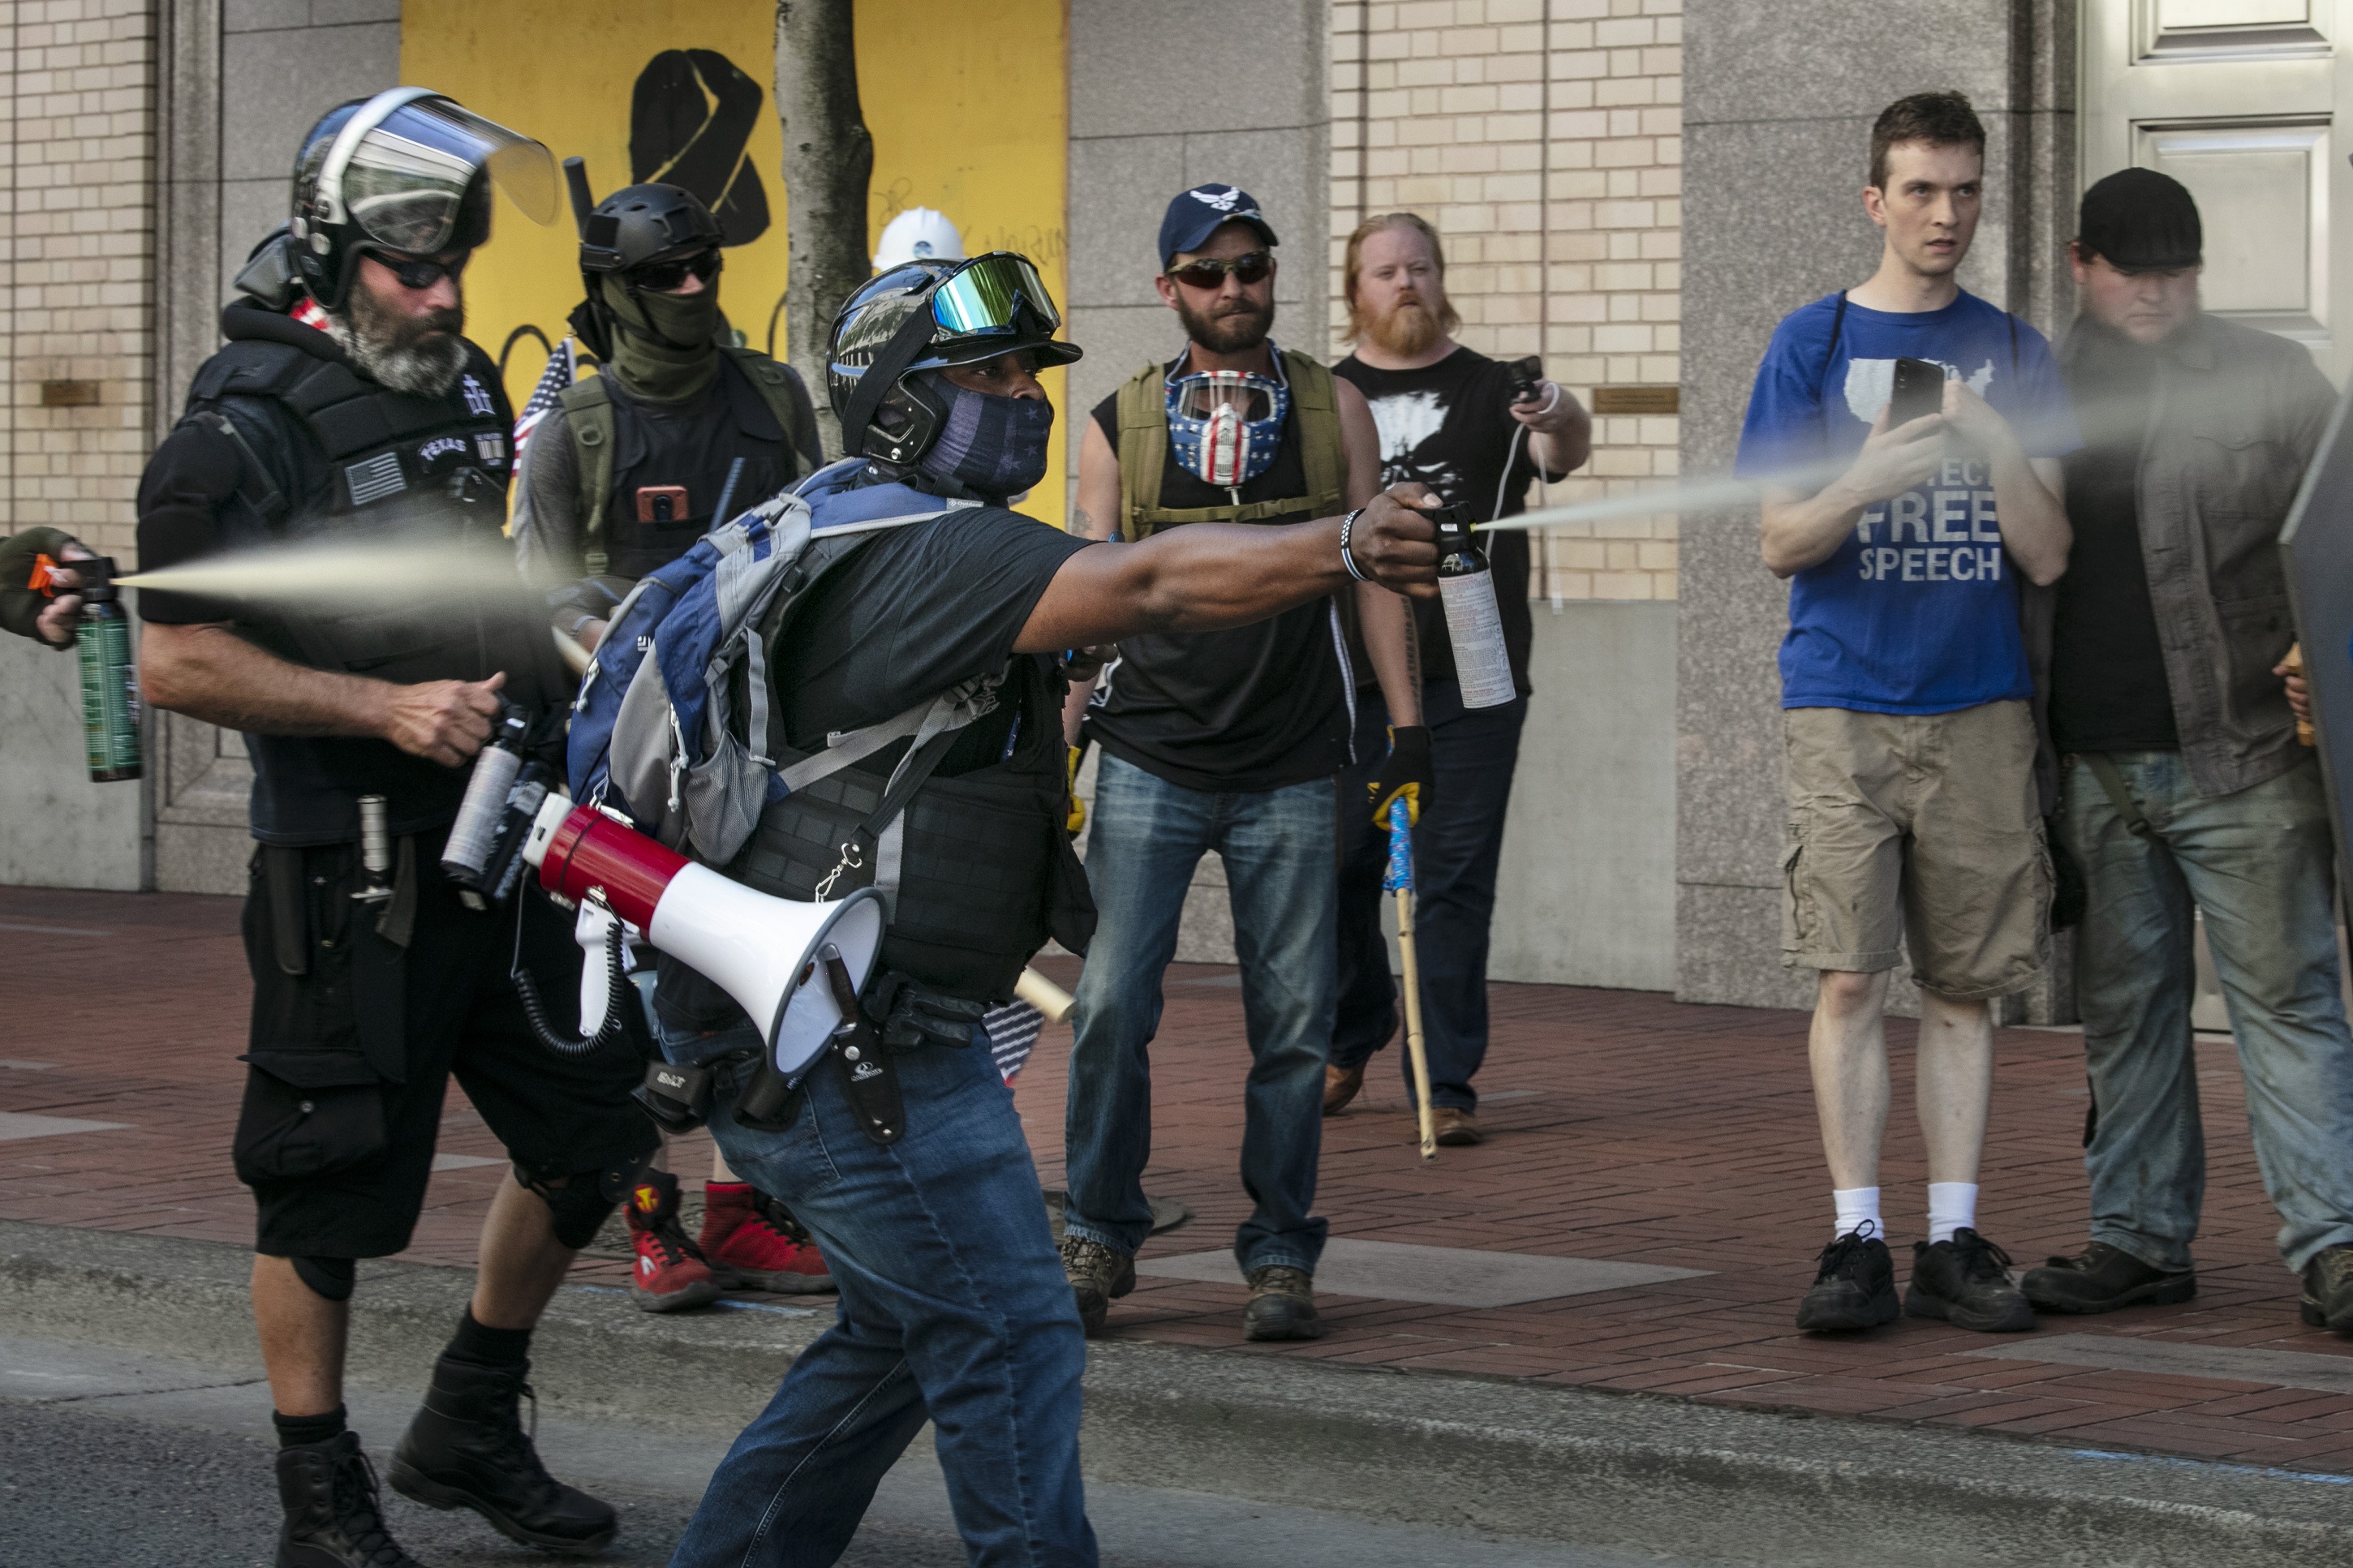 Portland Rioters Break Into Police Union Building, Try to Flood It: Police